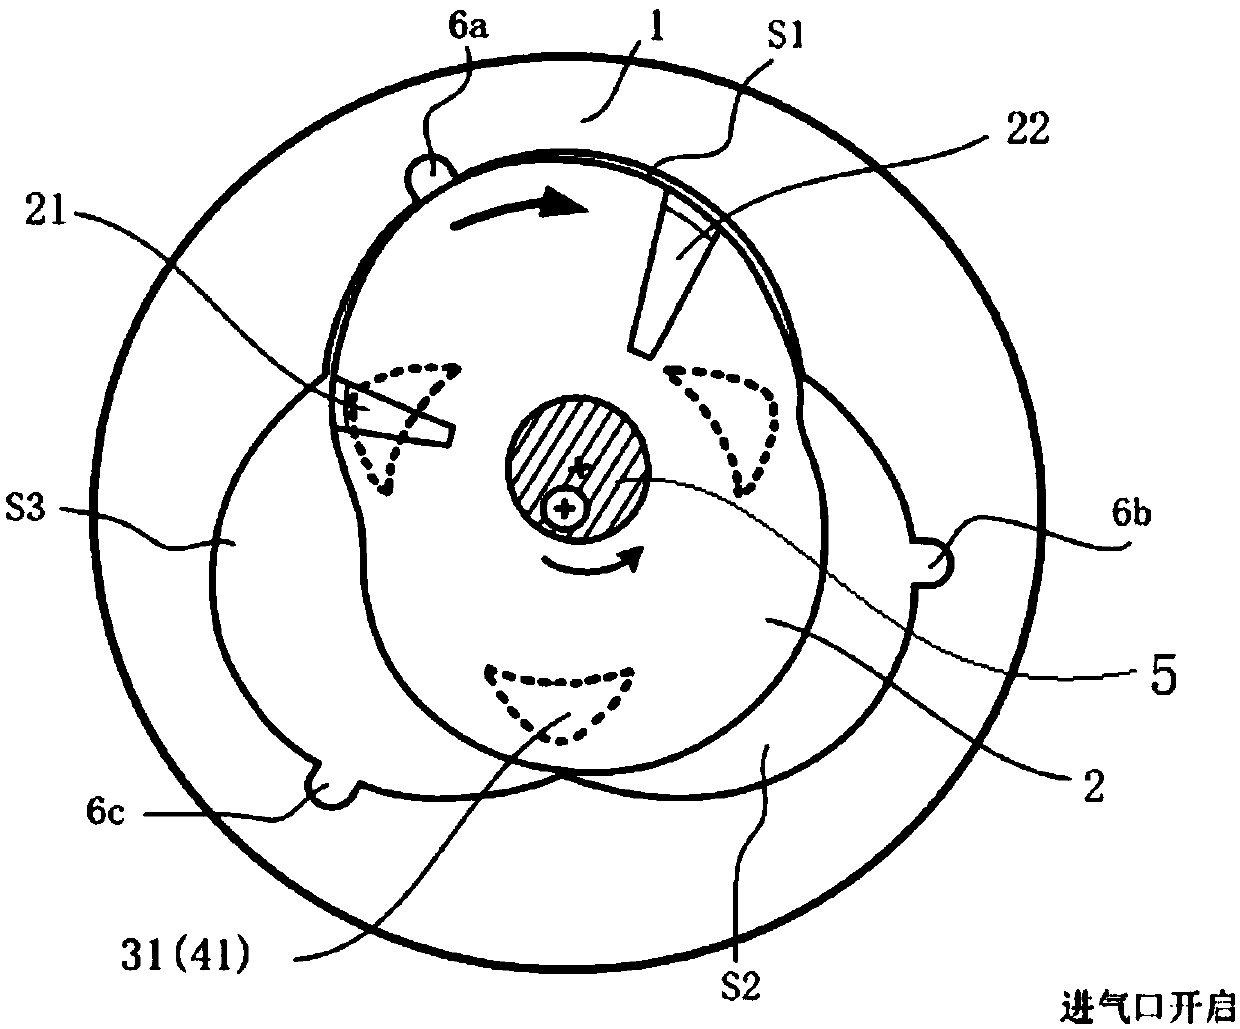 Combustion chamber structure of cycloid rotor engine and cycloid rotor engine